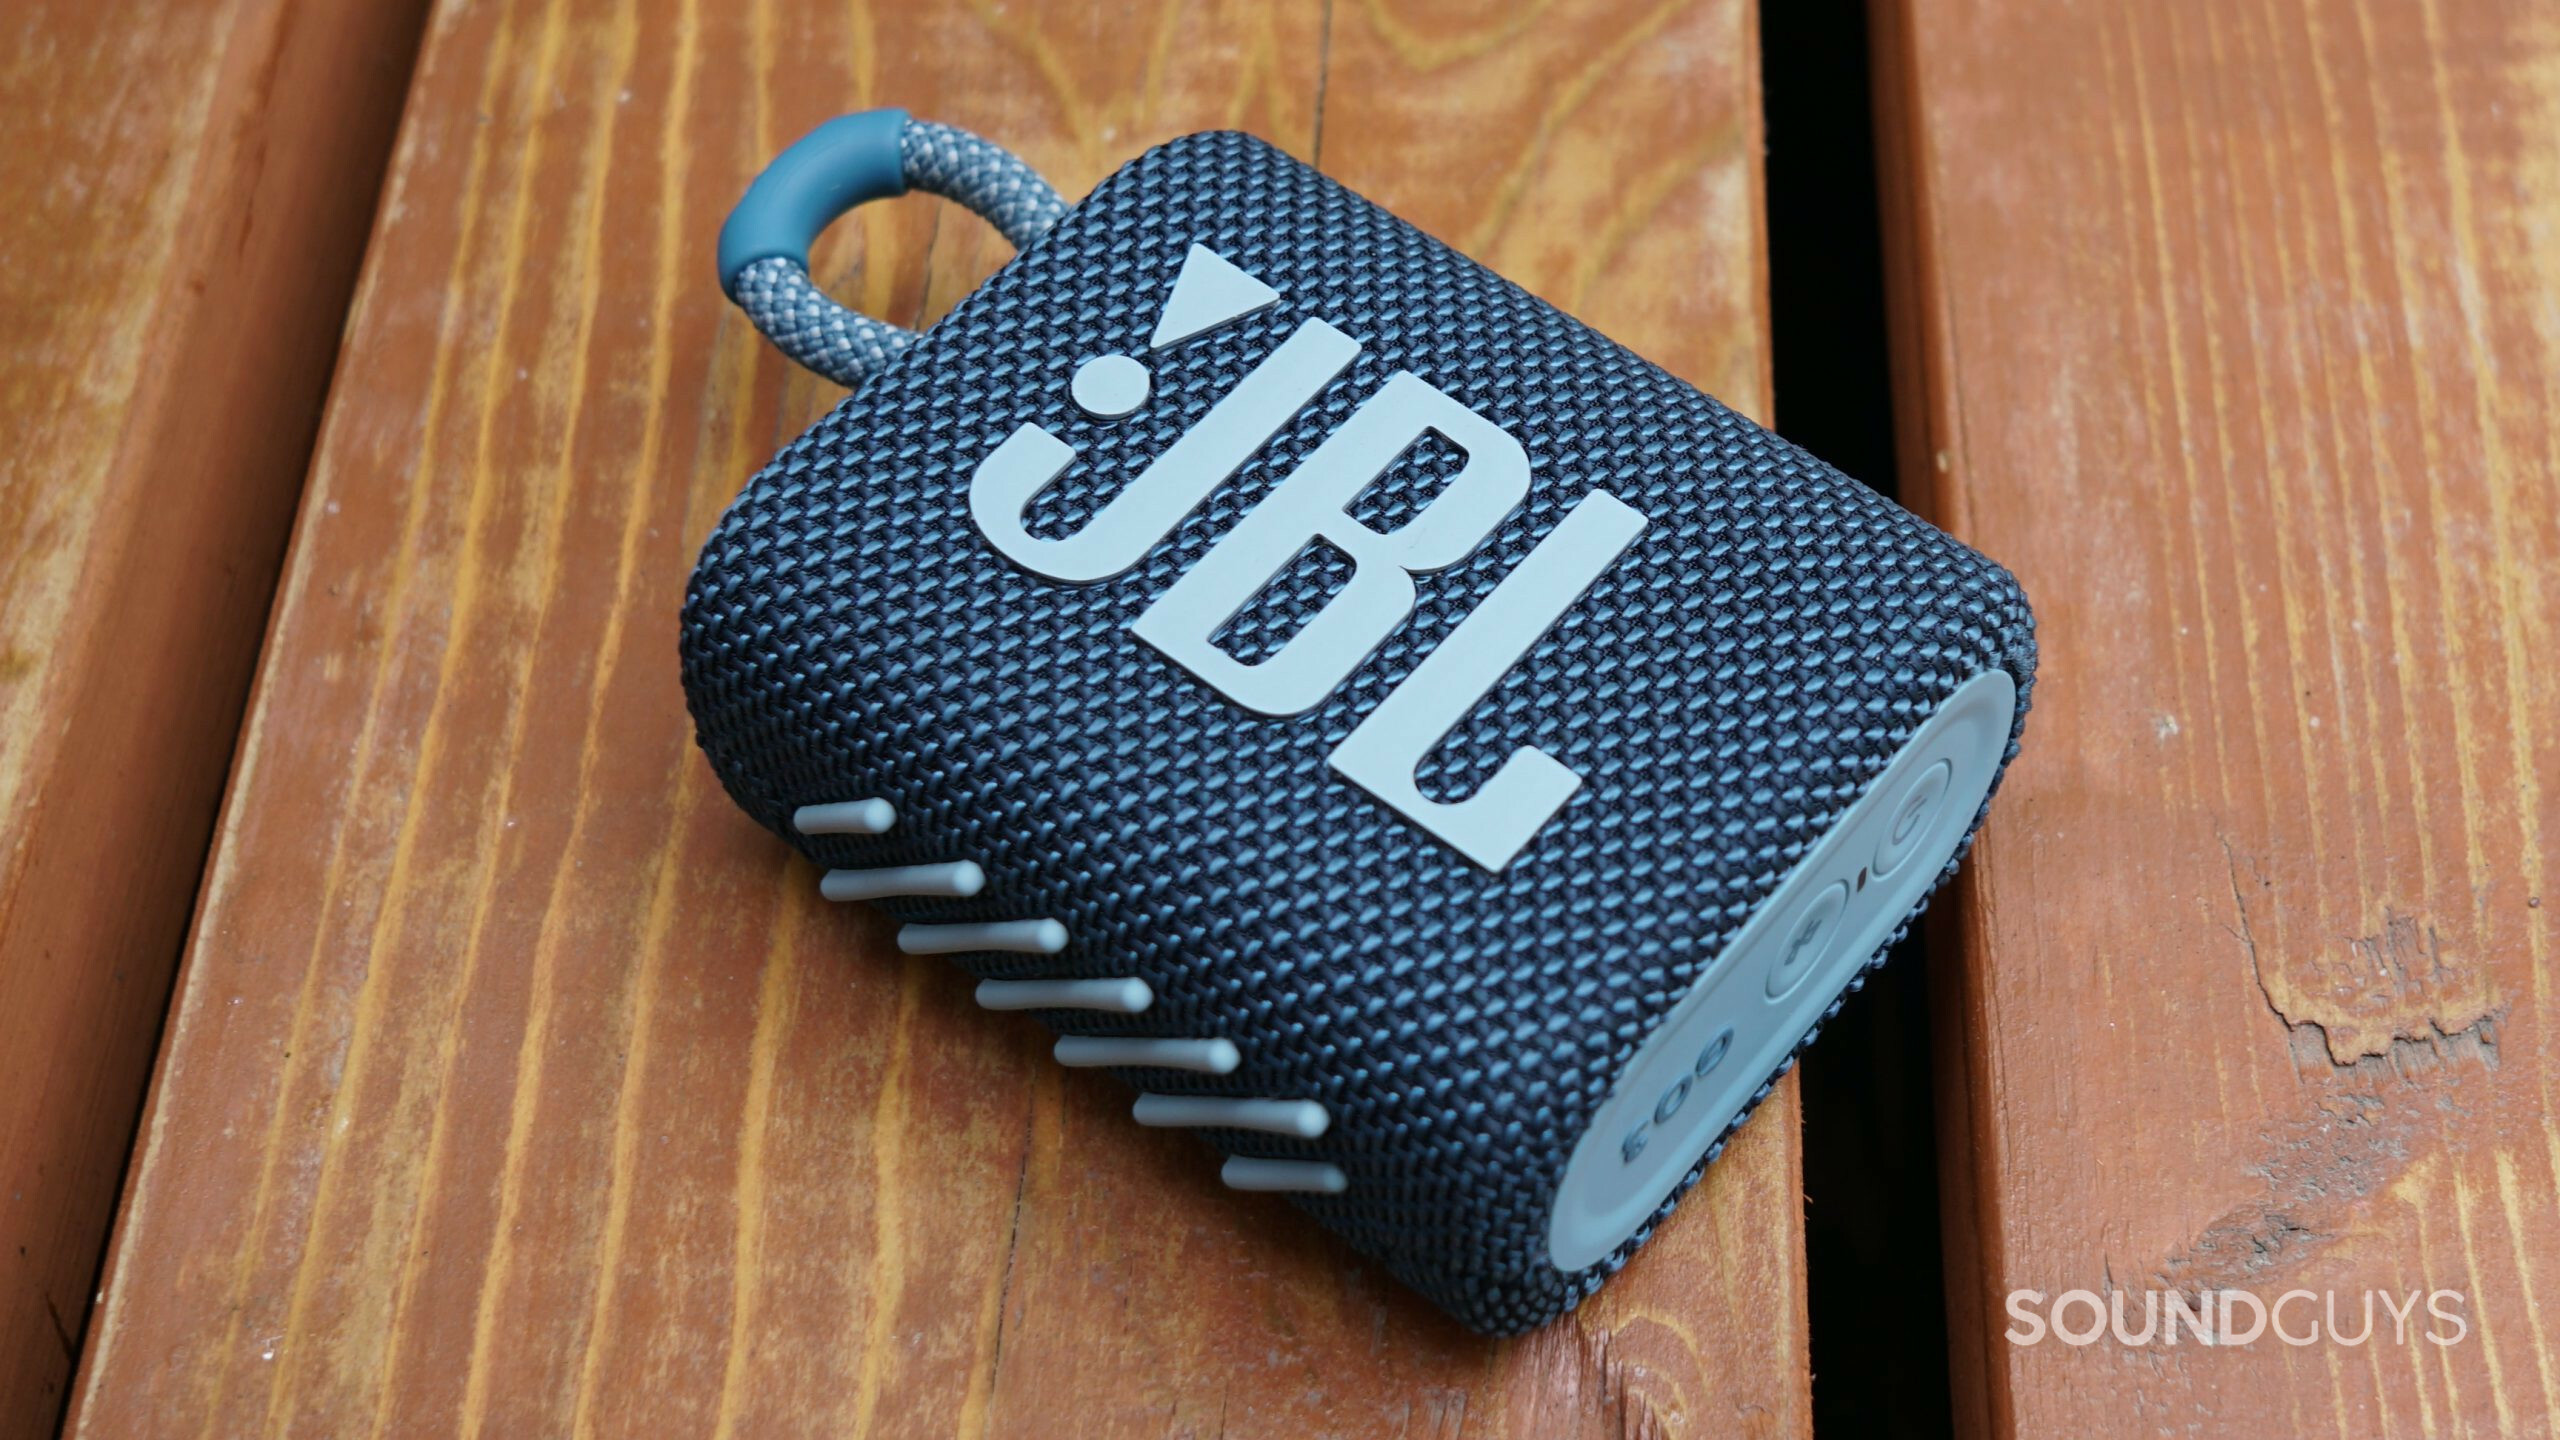  JBL Go 3: Portable Speaker with Bluetooth, Built-in